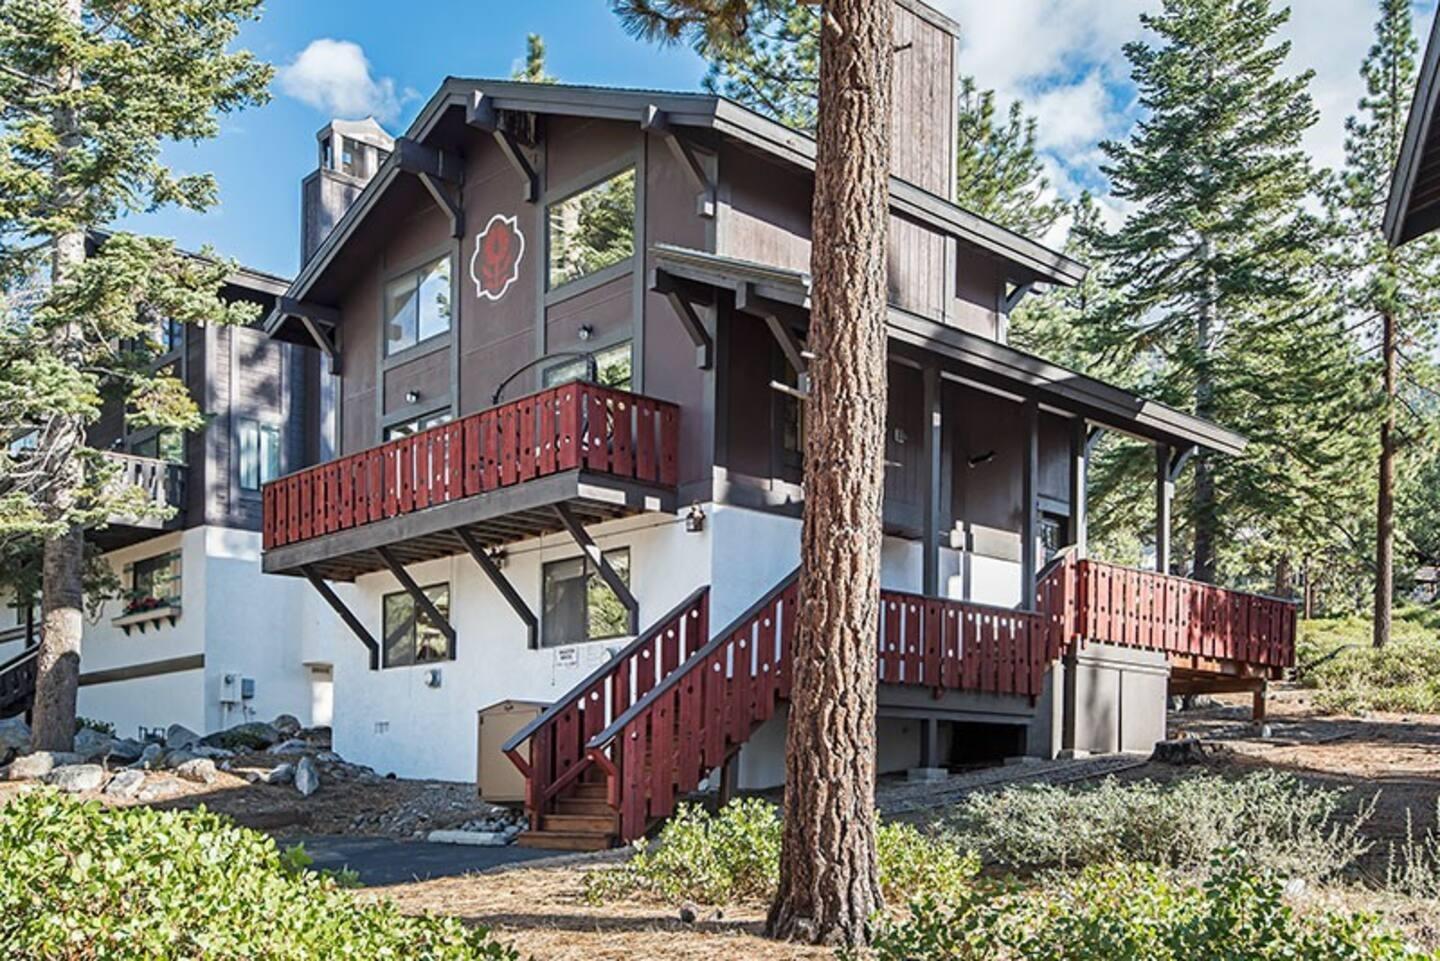 Photo of 1209 Timber Ln in South Lake Tahoe, CA